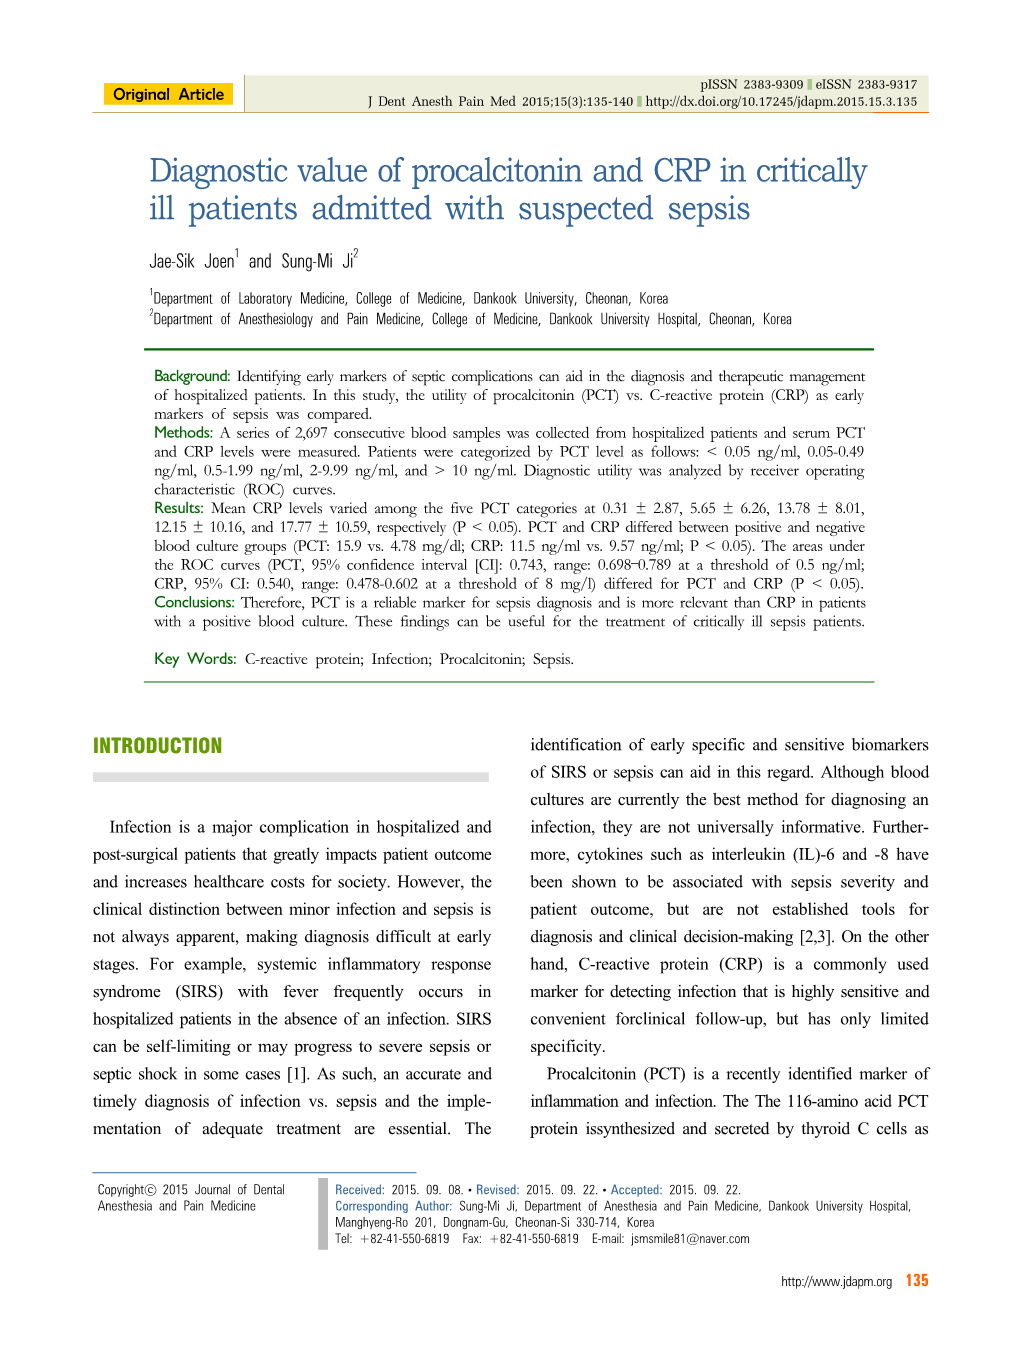 Diagnostic Value of Procalcitonin and CRP in Critically Ill Patients Admitted with Suspected Sepsis